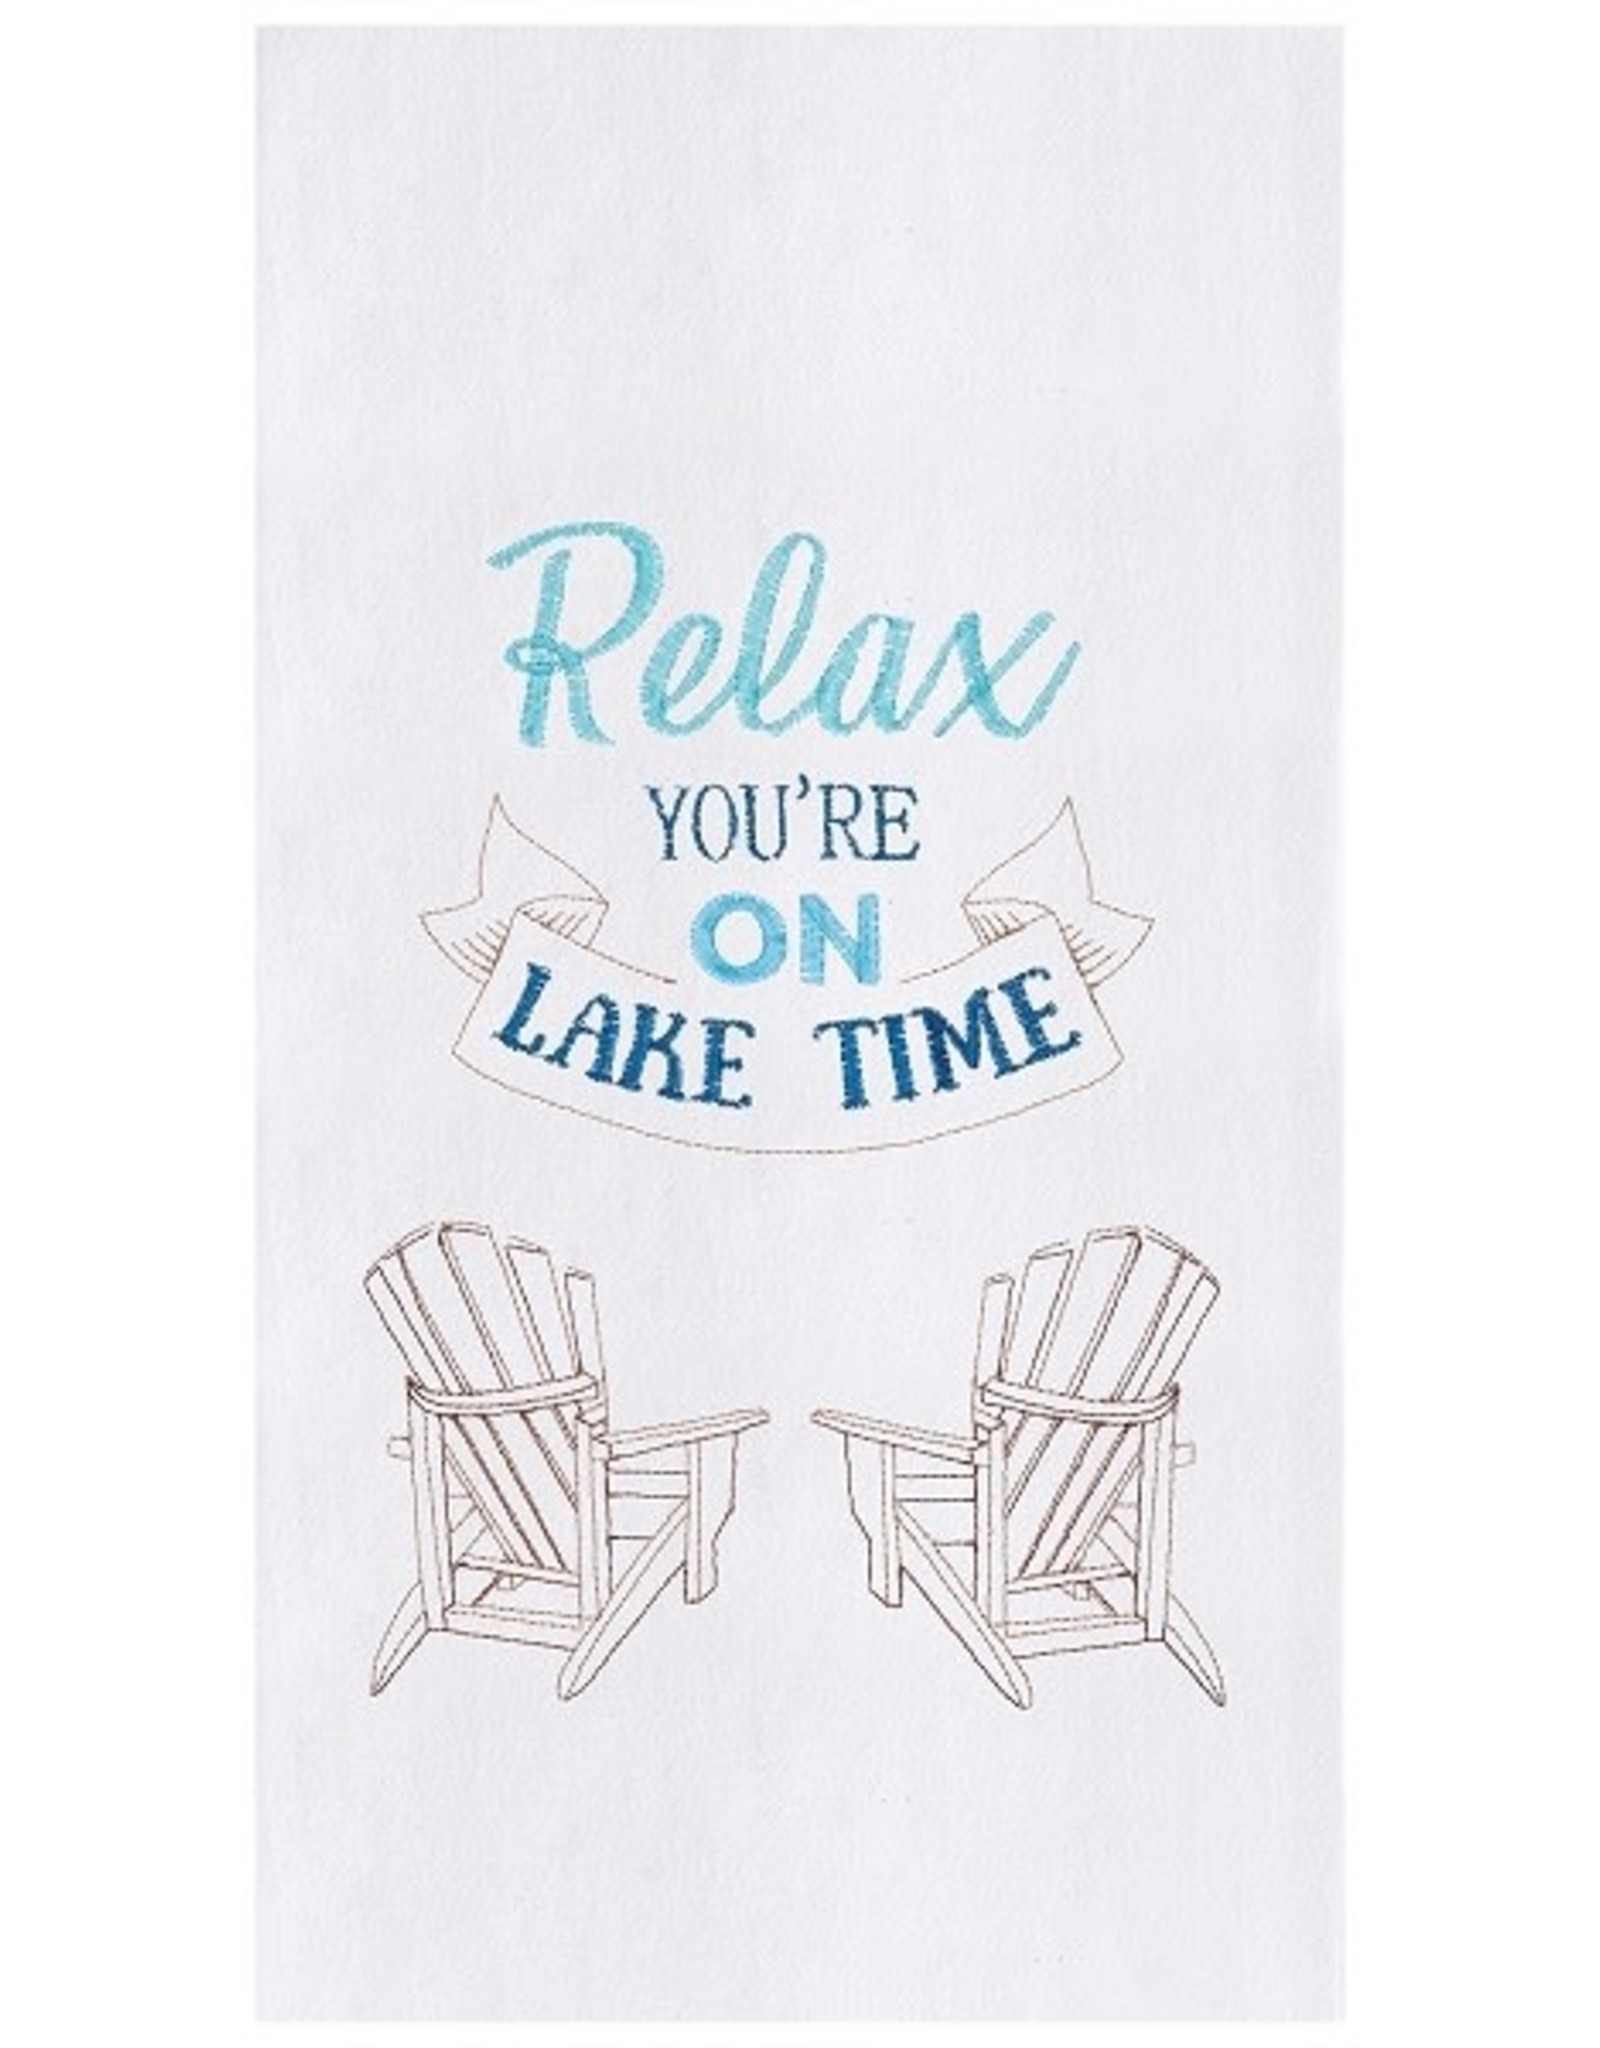 C and F Enterprises RELAX LAKE TIME KITCHEN TOWEL